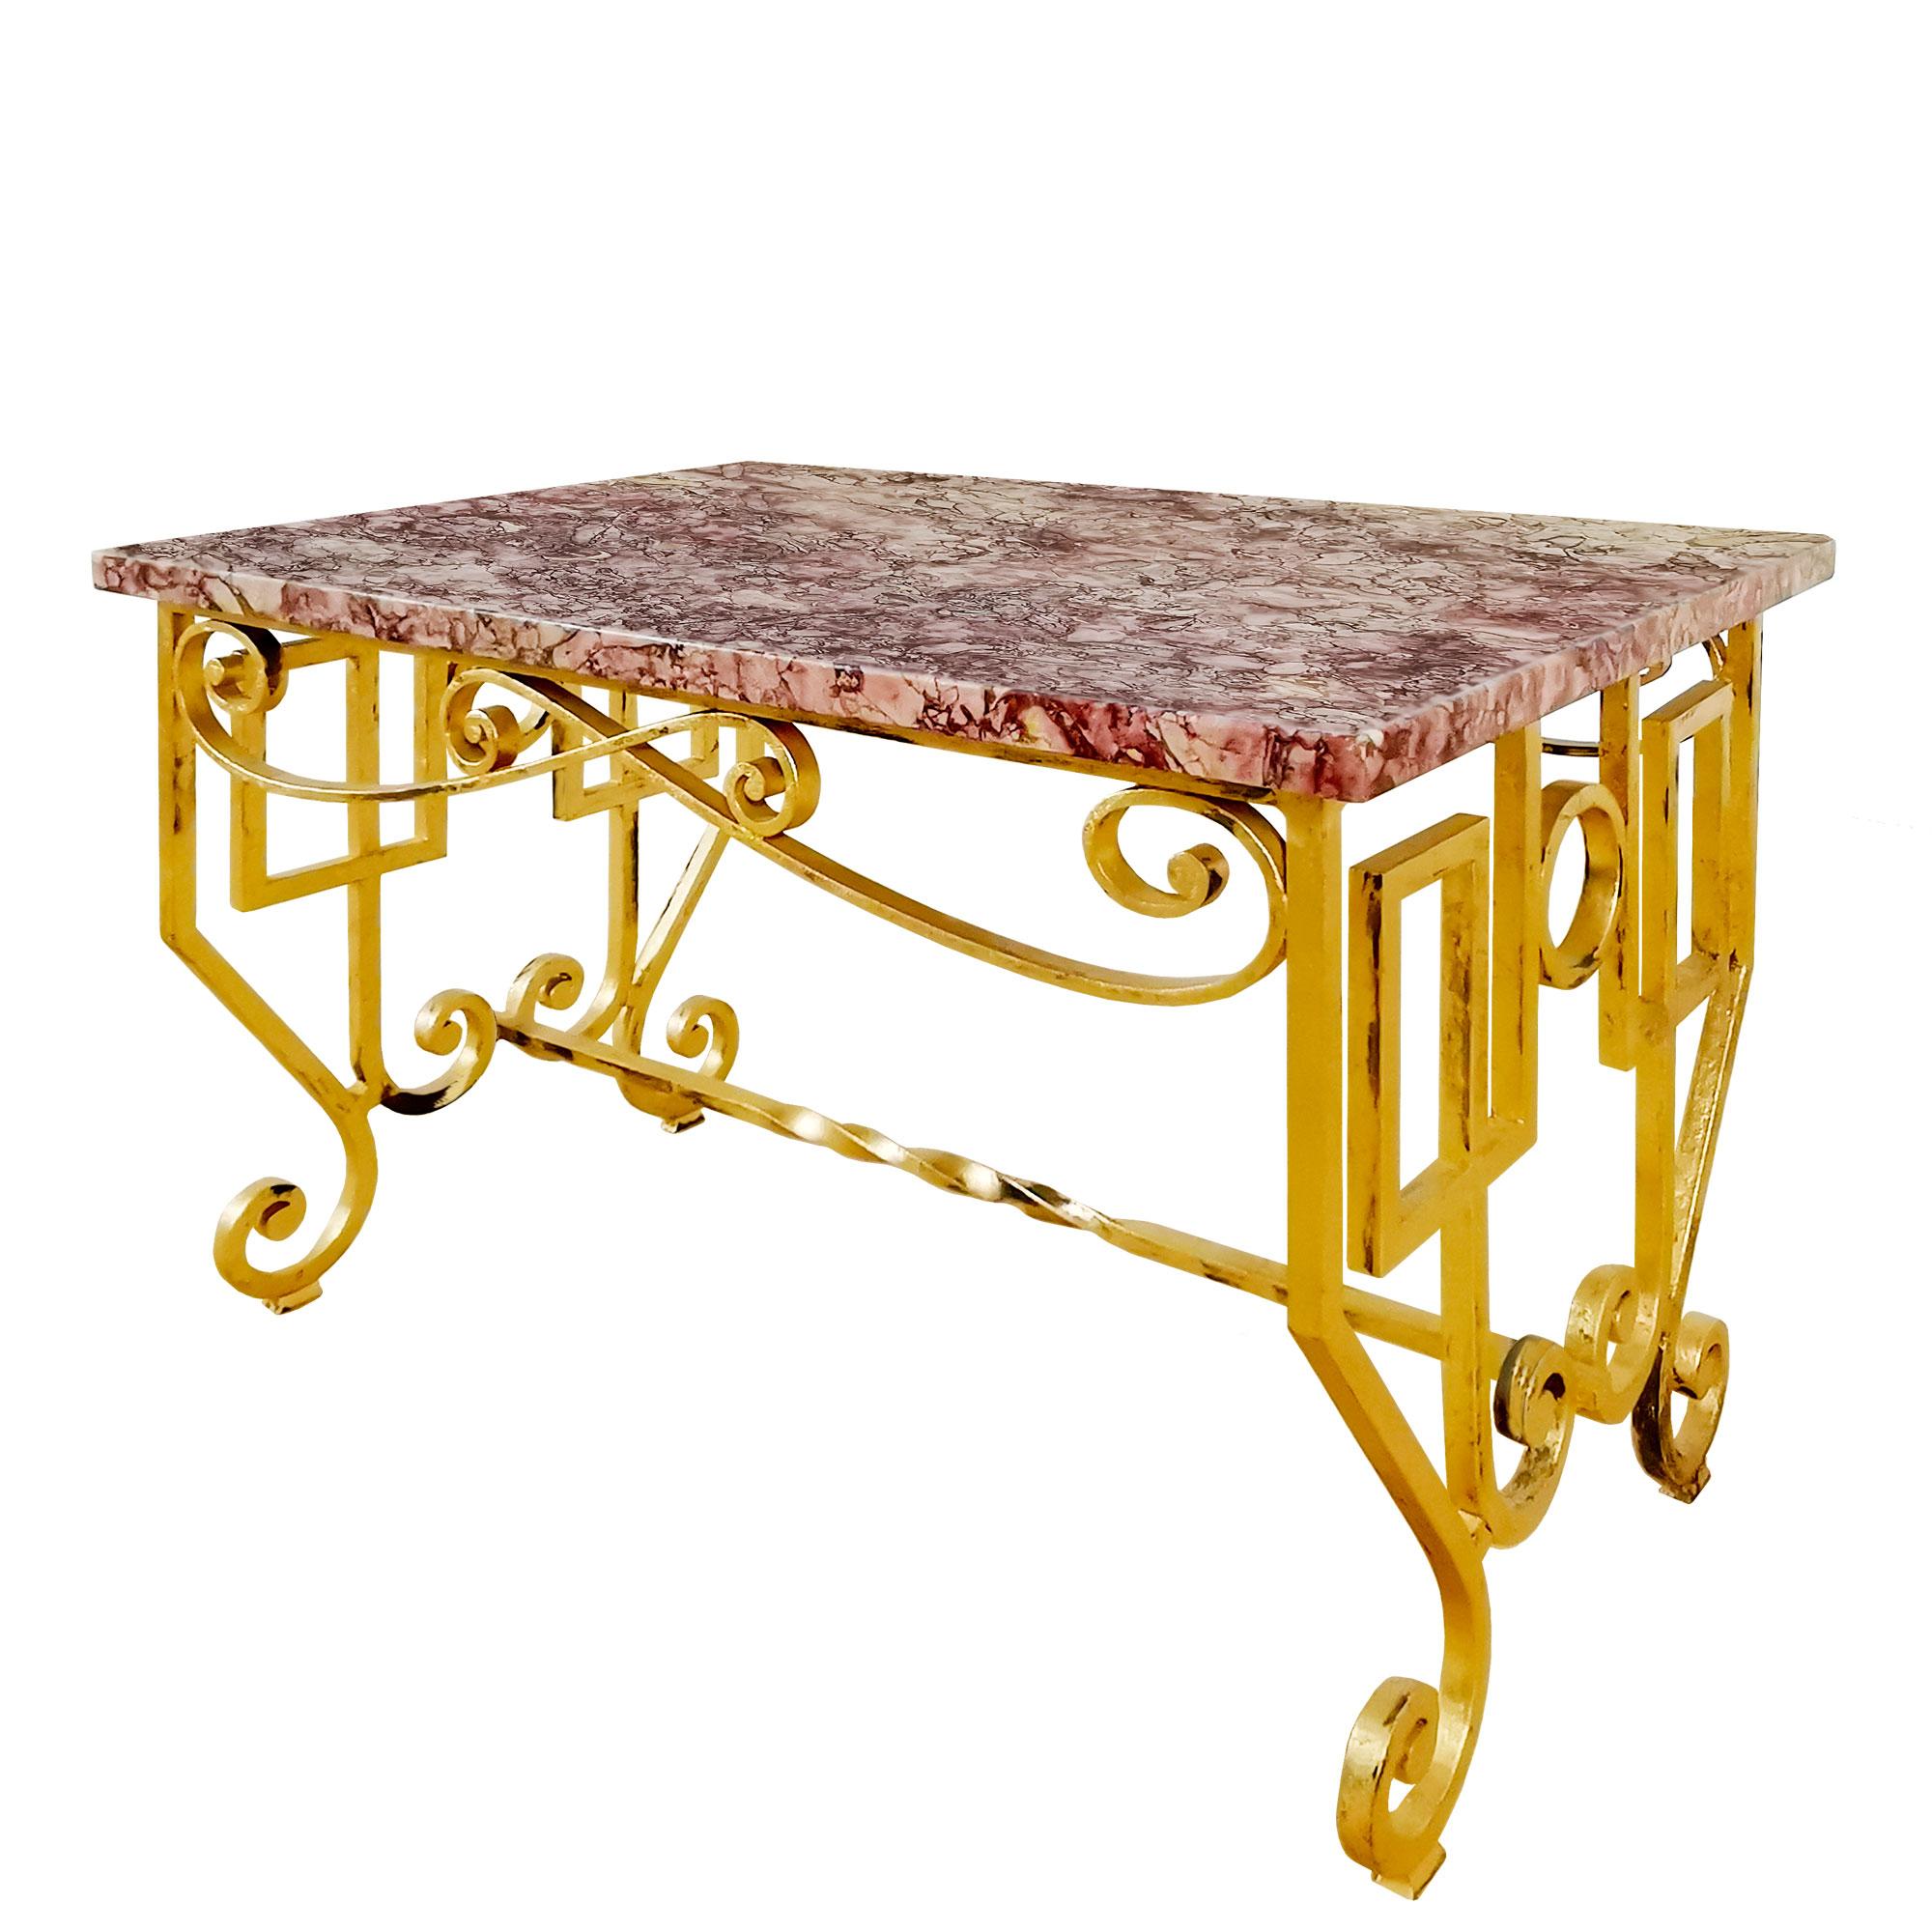 Coffee table, golden leaf wrought iron (some oxidation) with a red marble on top.

France c. 1940.